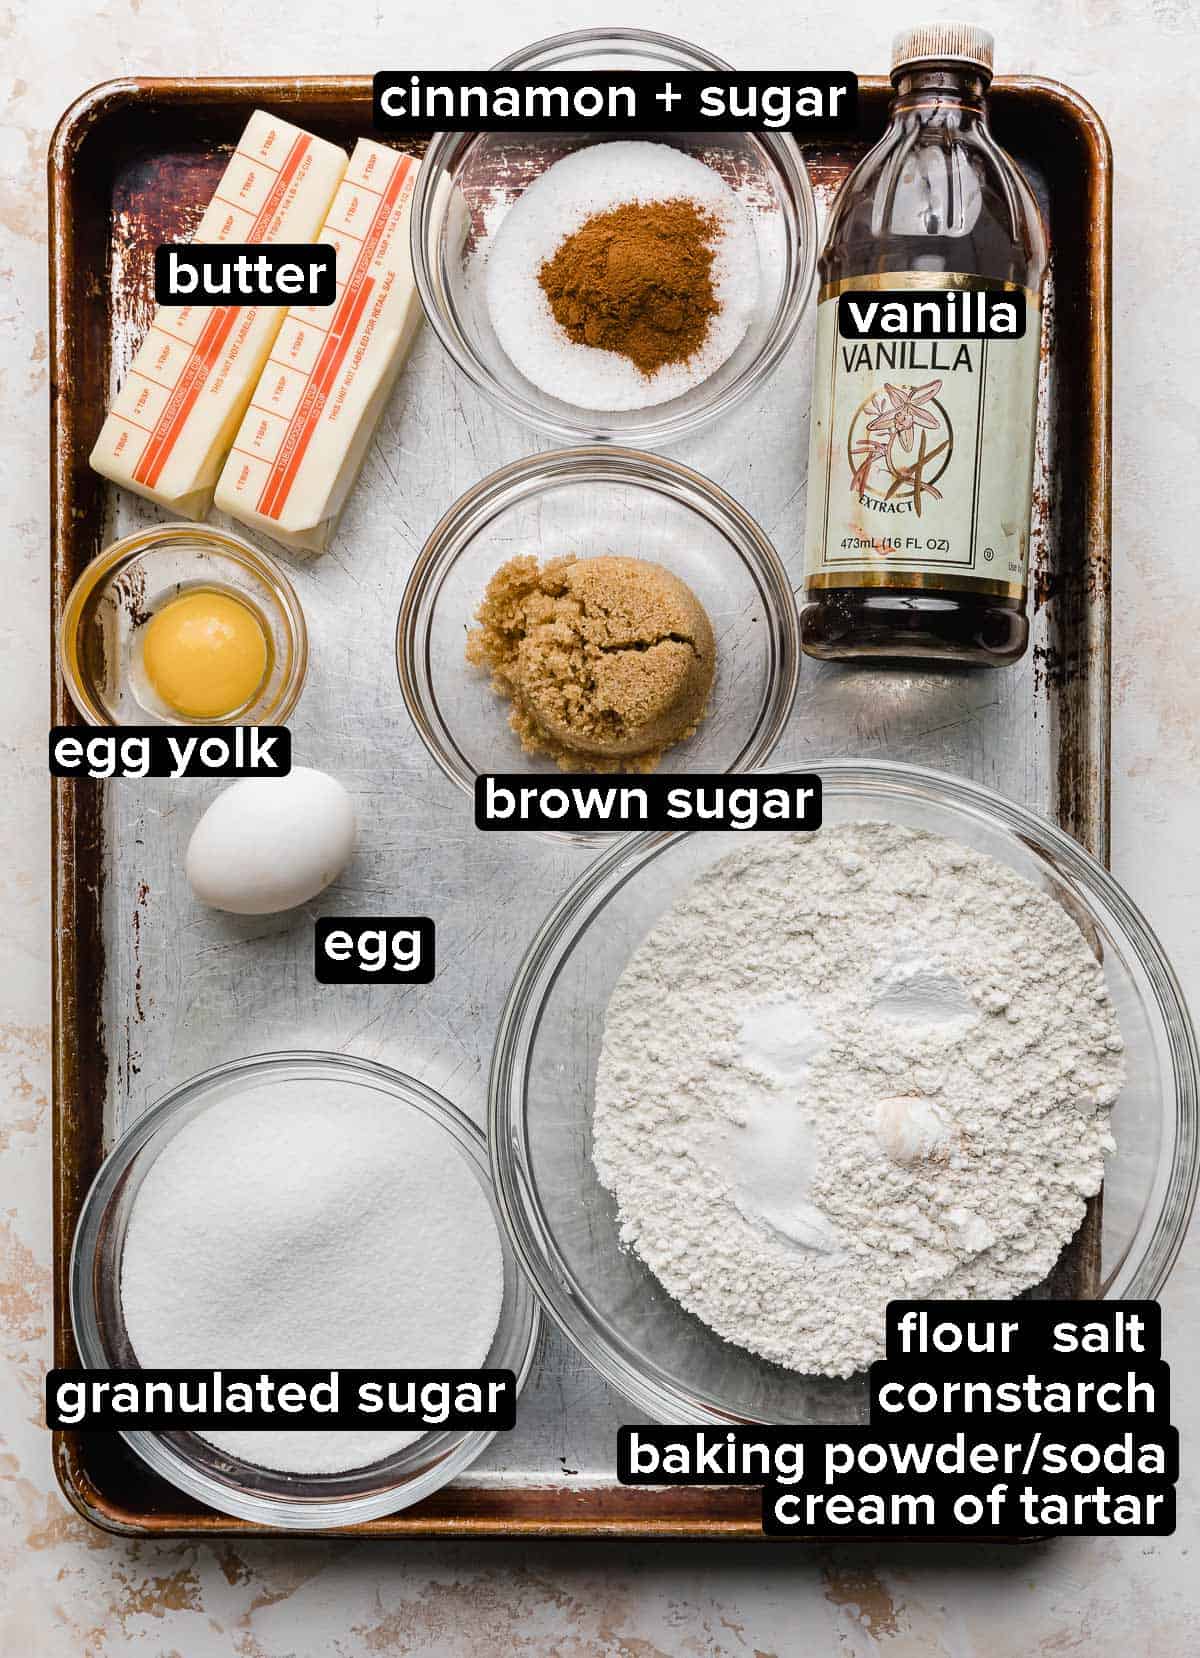 Snickerdoodle Bar ingredients on a baking sheet, each ingredients portioned into glass bowls: butter, egg, yolk, sugar, cinnamon, vanilla, flour, cream of tartar, and leavening agents.